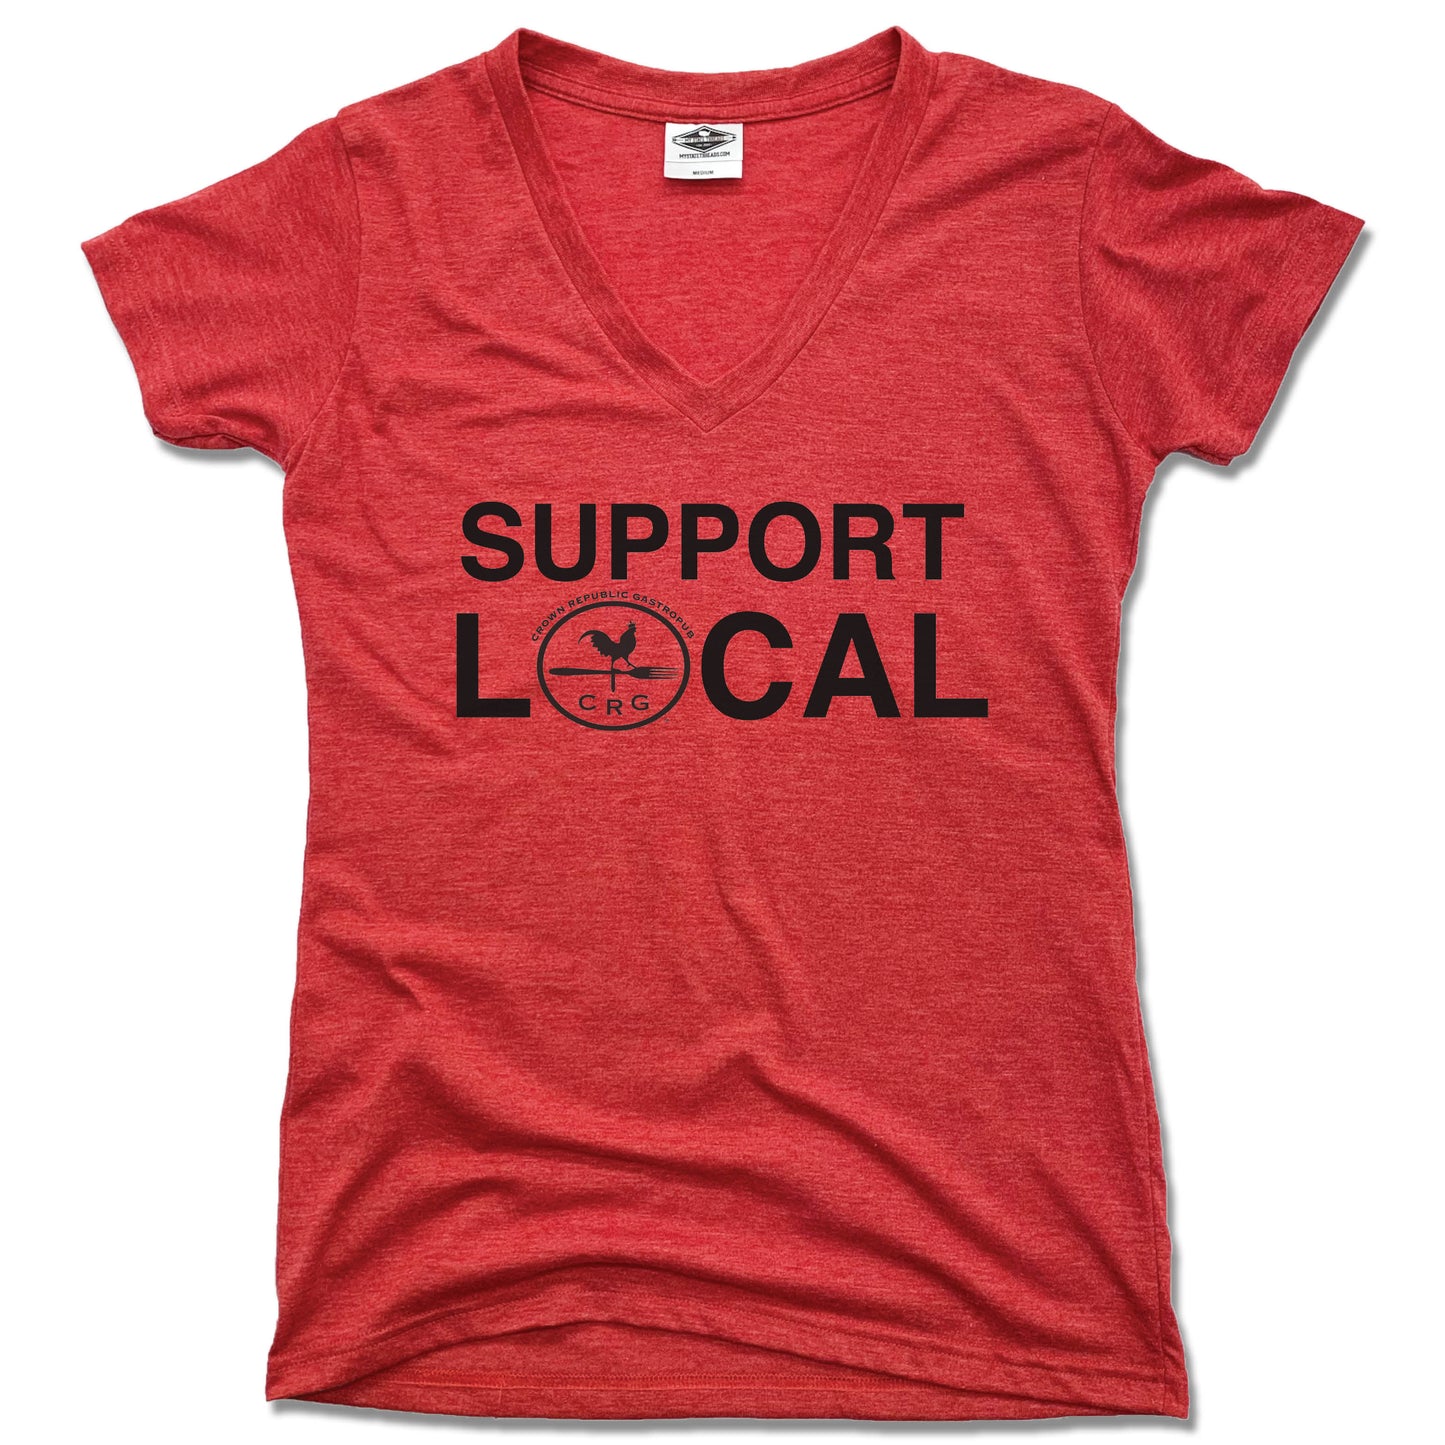 Support Local CRG | LADIES RED V-NECK